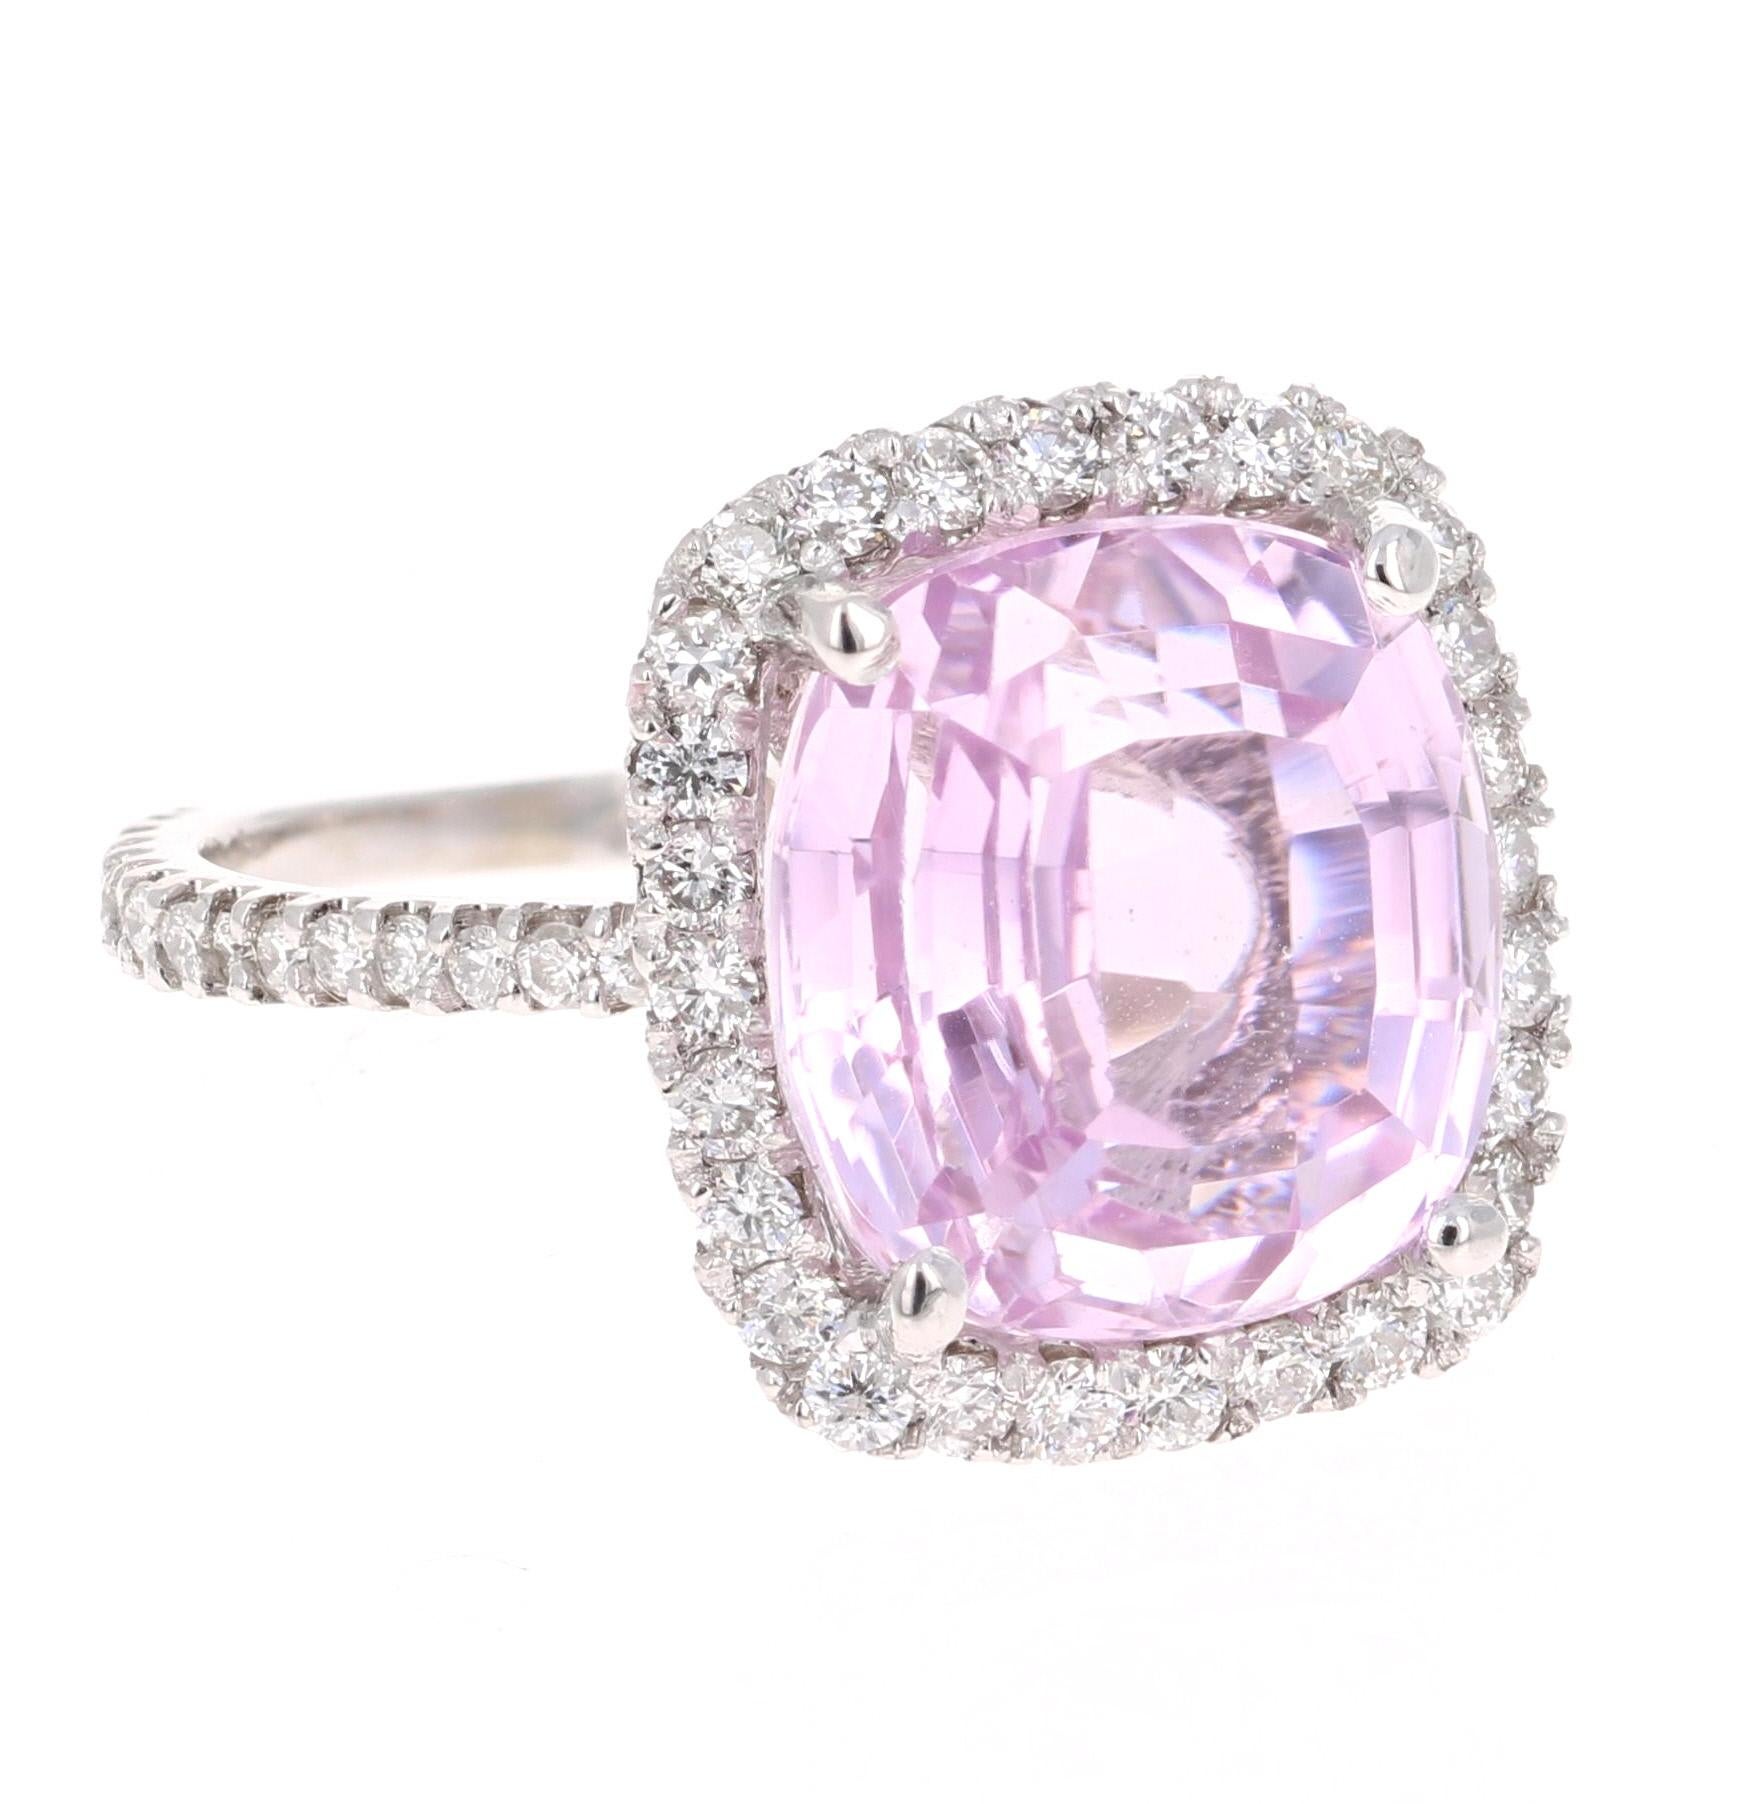 A lovely Engagement Ring Option or as an alternate to a Pink Diamond Ring! 

This simply stunning Kunzite Diamond Ring has a 8.12 Carat Kunzite as its center and has a beautiful simple halo of 76 Round Cut Diamonds that weigh 0.80 carats (CLarity: